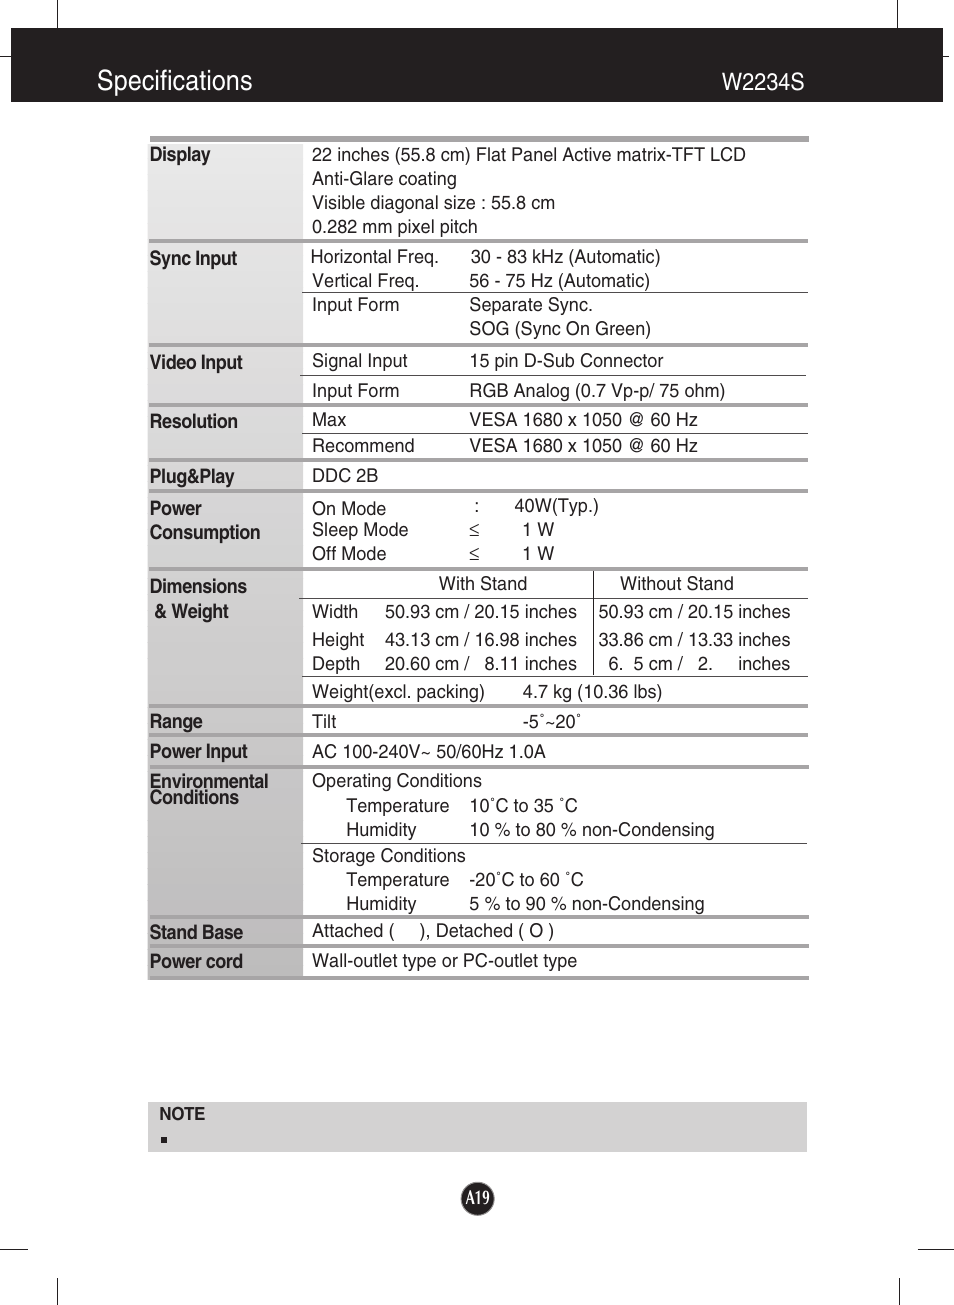 W2234s, Specifications | LG W2234S-BN User Manual | Page 20 / 24